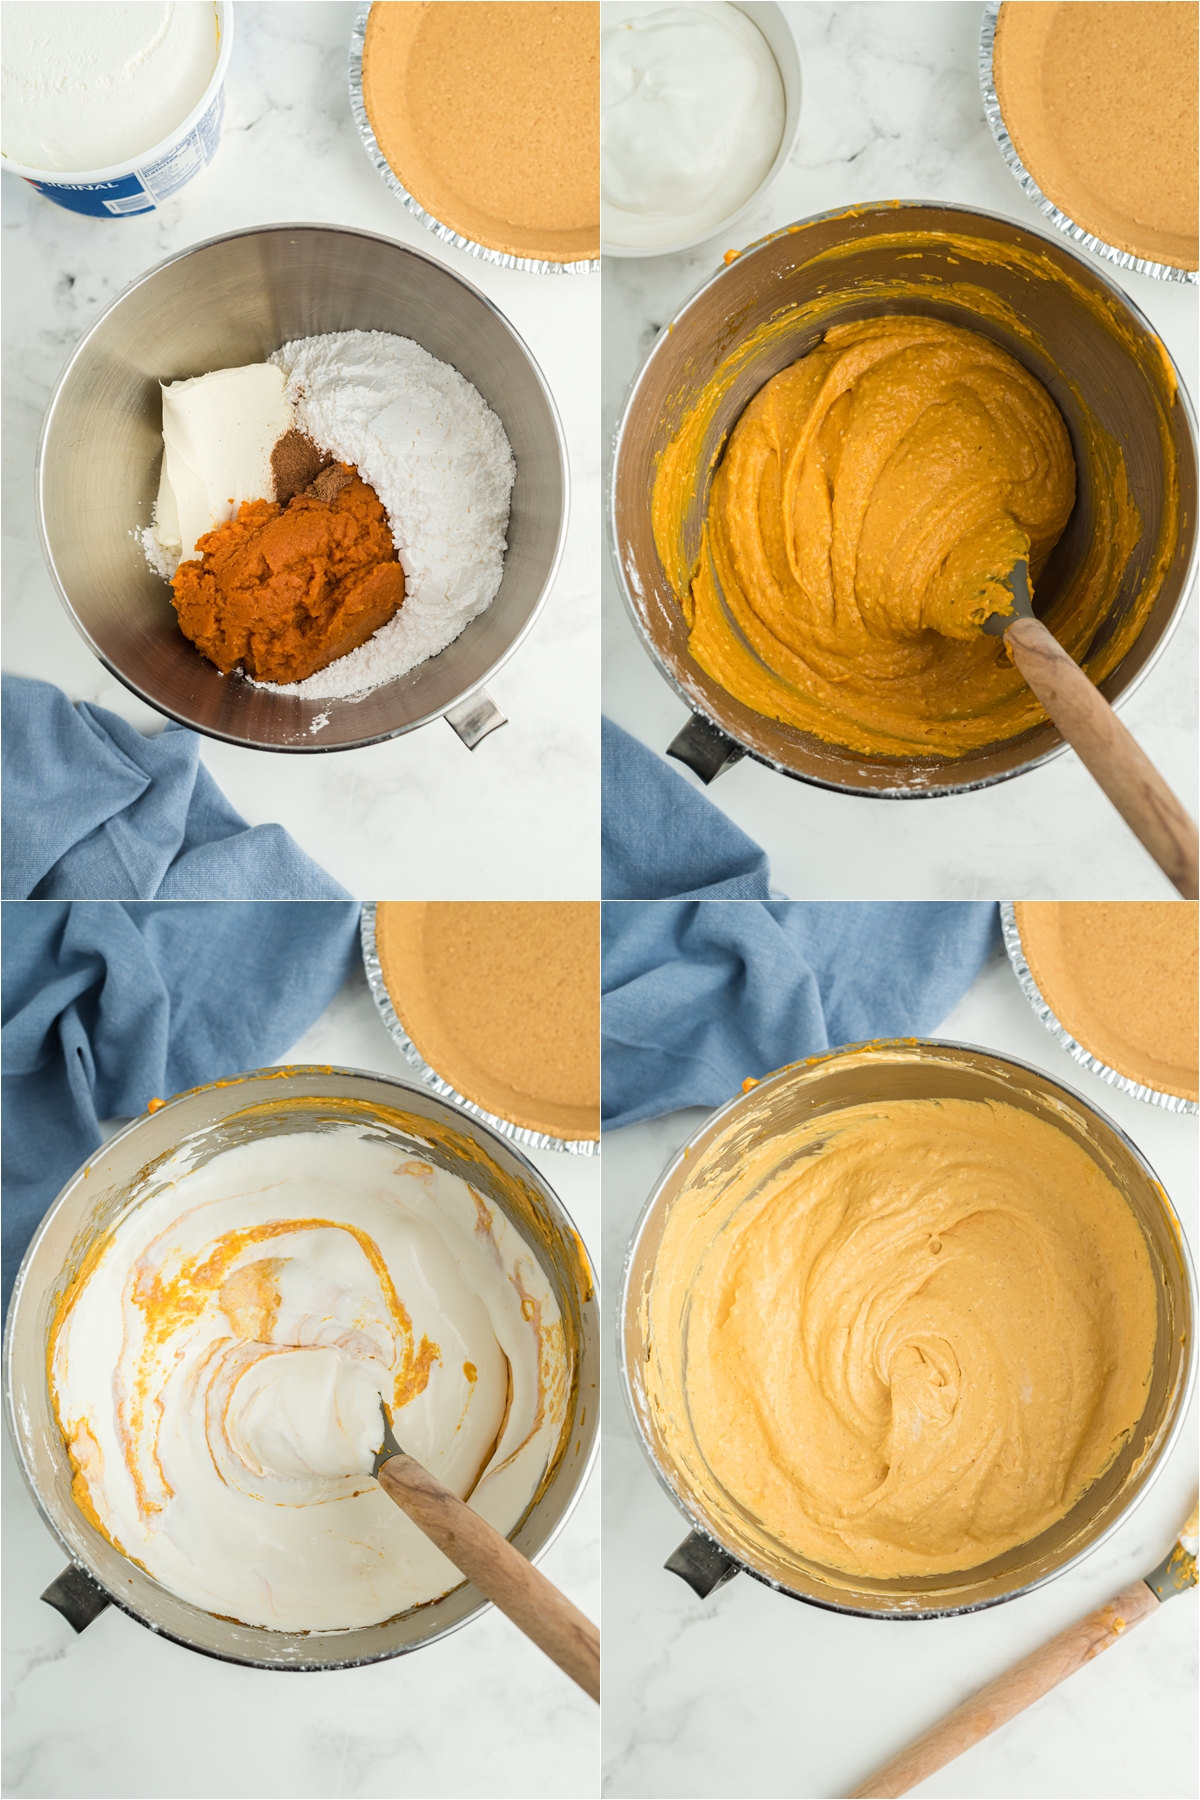 Ingredients and process of creating a Cool whip pumpkin pie. 